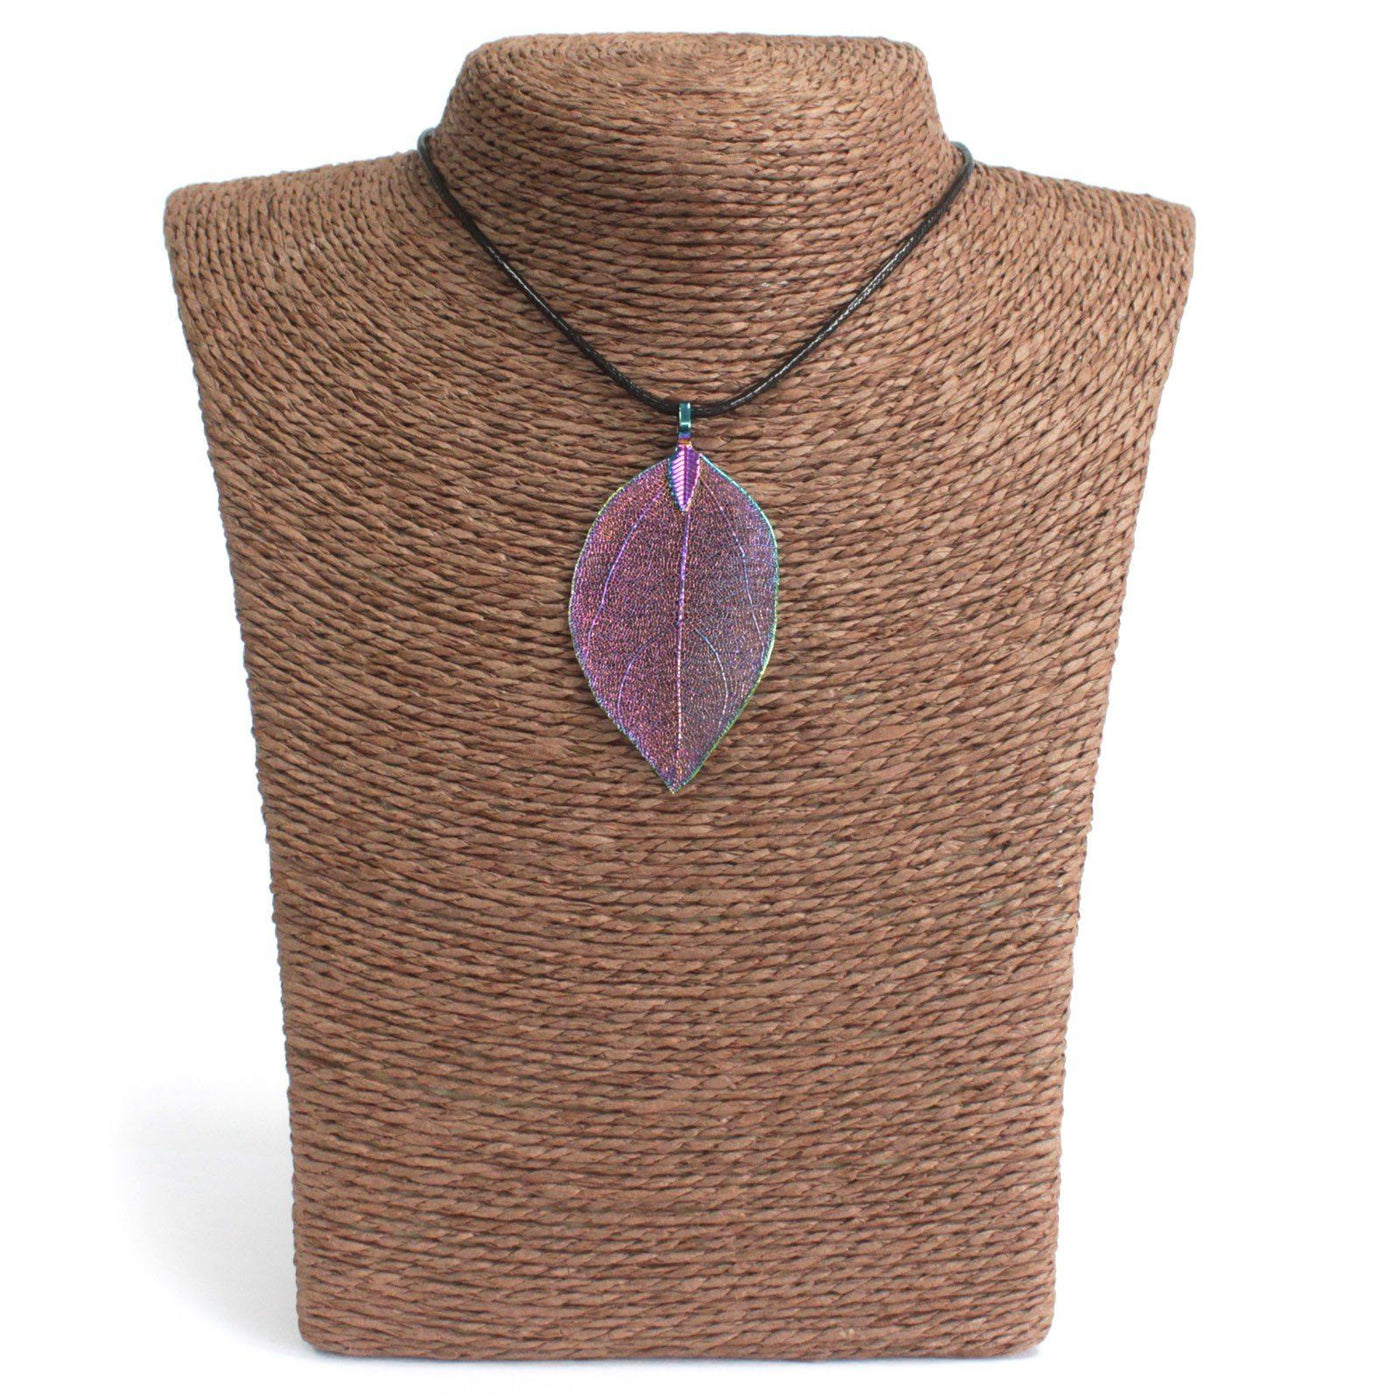  Bravery Leaf Real Leaf Multicolour Jewellery Necklace.